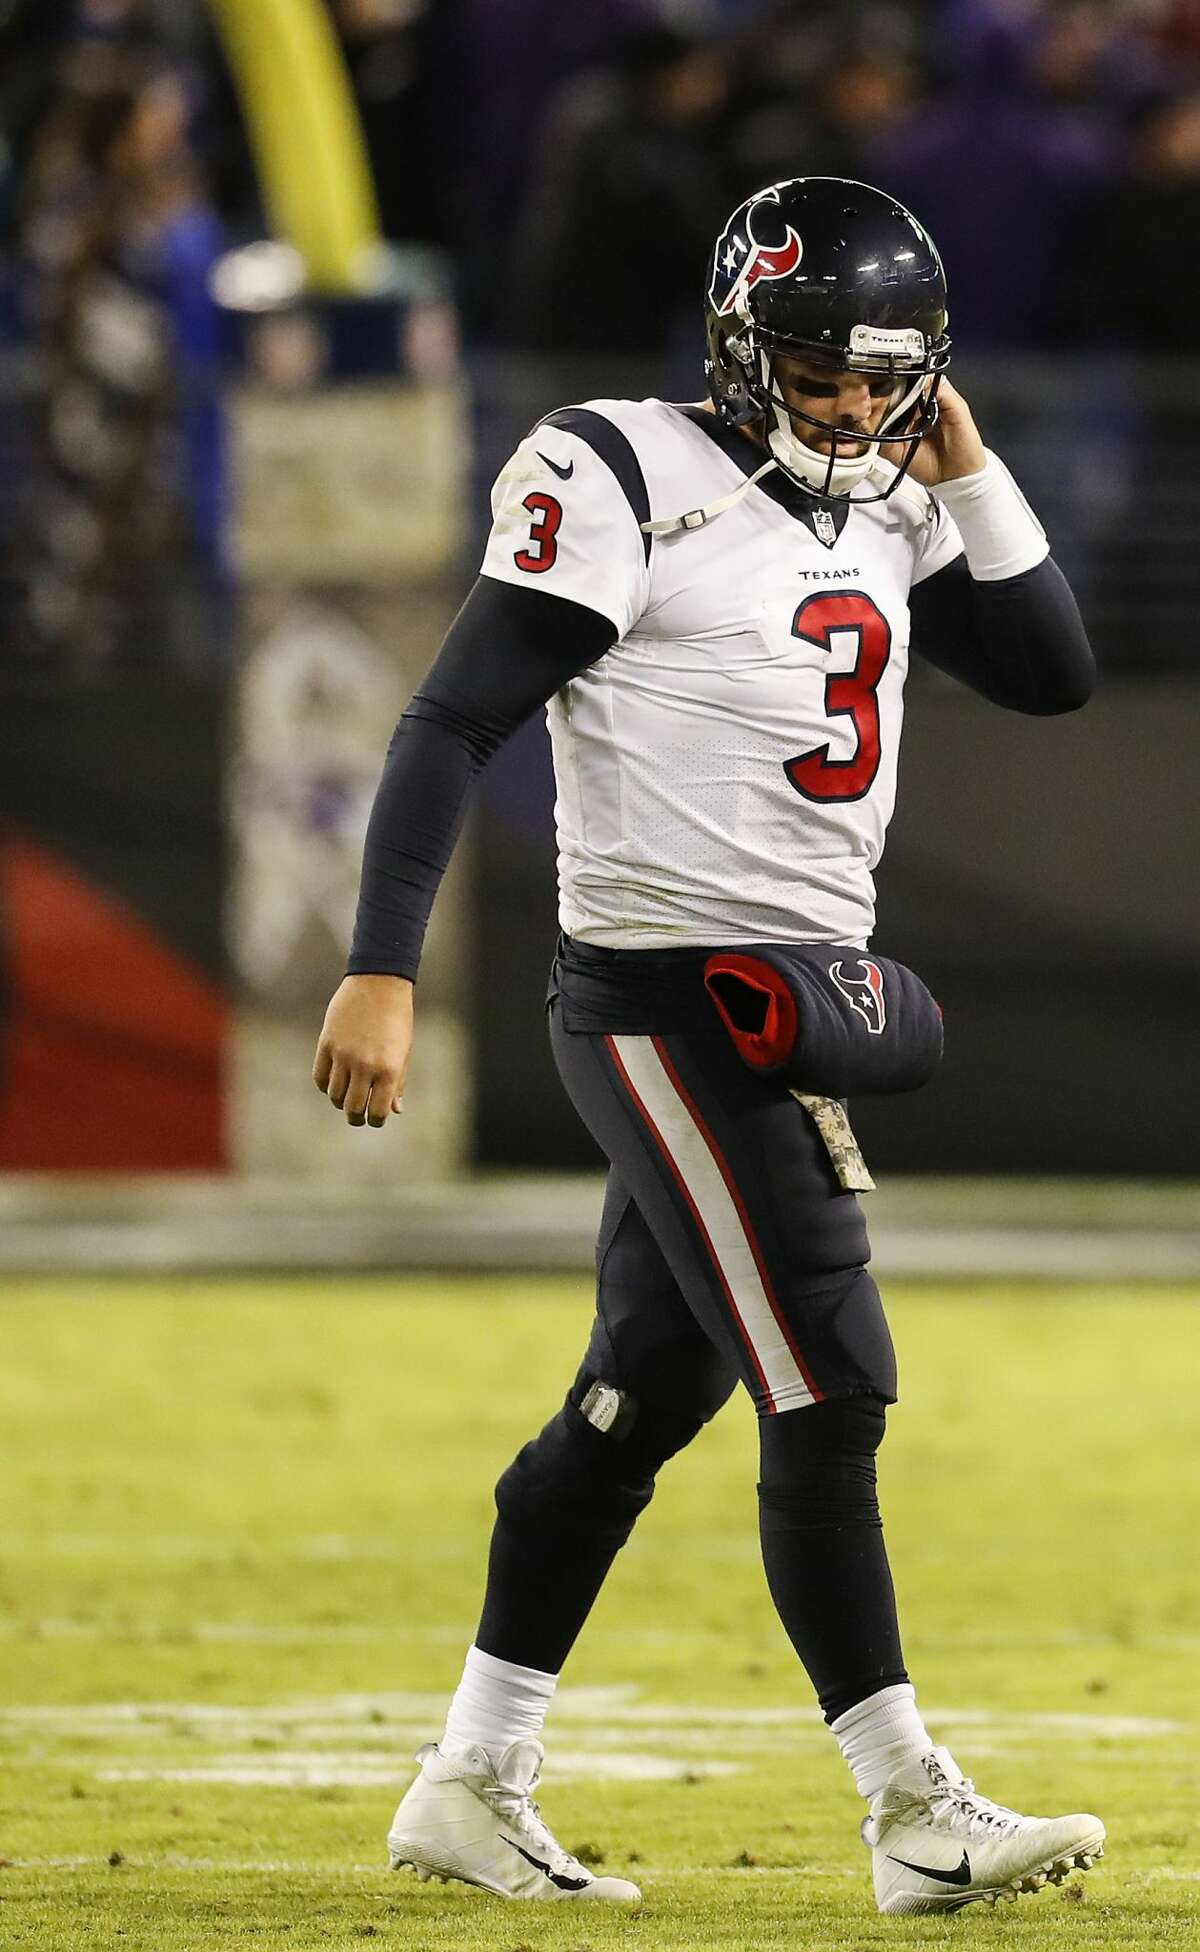 Houston Texans quarterback Tom Savage (3) reacts after throwing an interception to Baltimore Ravens cornerback Anthony Levine (41) during the fourth quarter of an NFL football game at M & T Bank Stadium on Monday, Nov. 27, 2017, in Baltimore. ( Brett Coomer / Houston Chronicle )